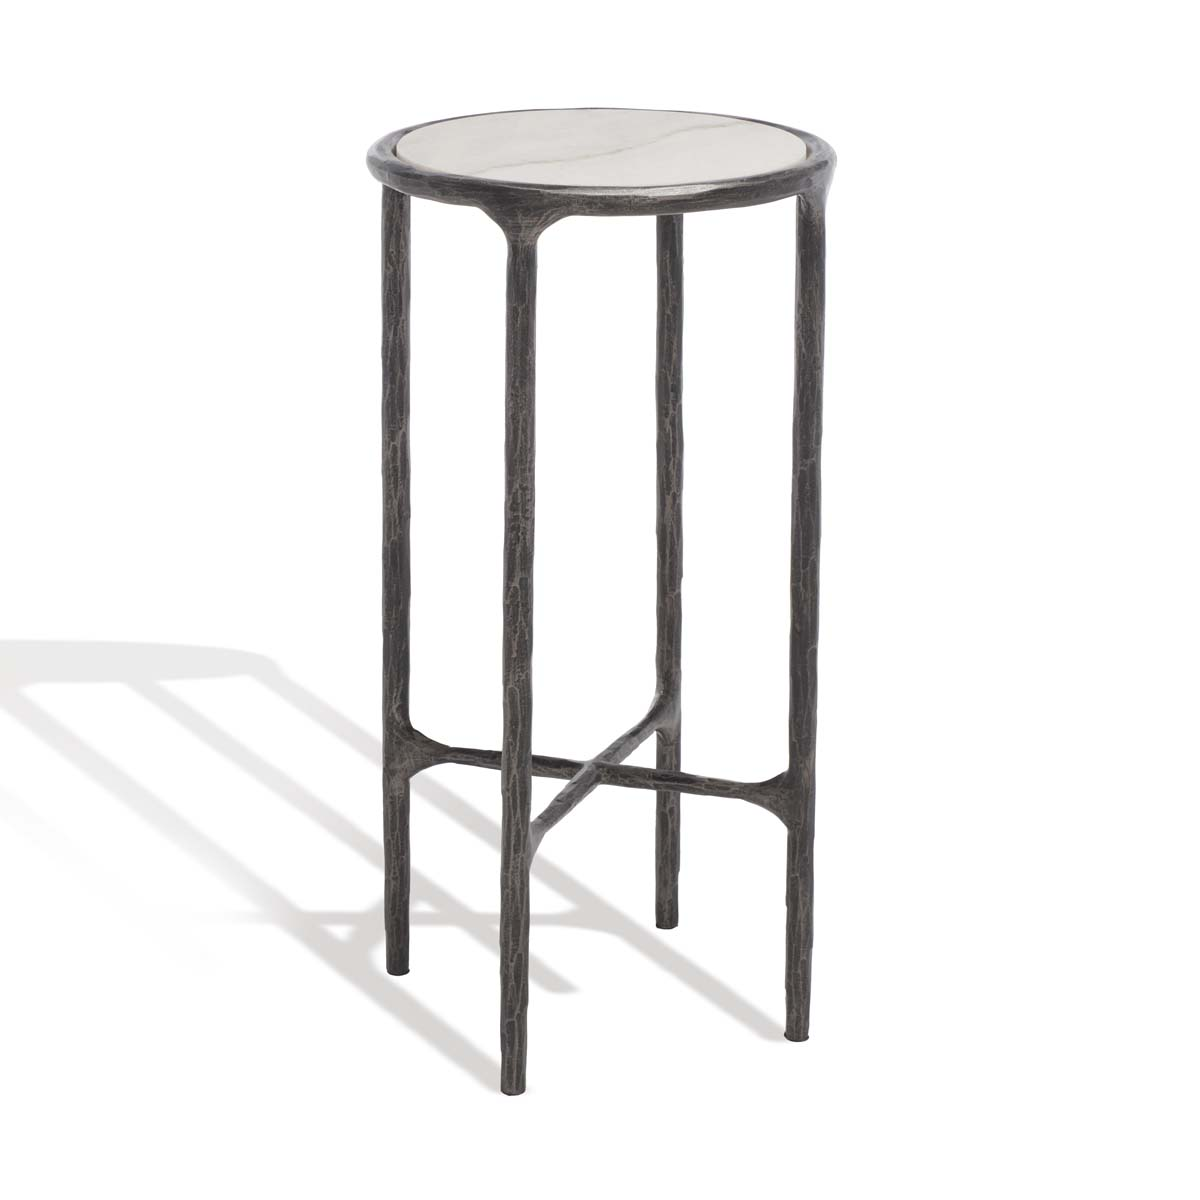 Safavieh Couture Jessa Forged Metal Tall Round End Table - Black / White